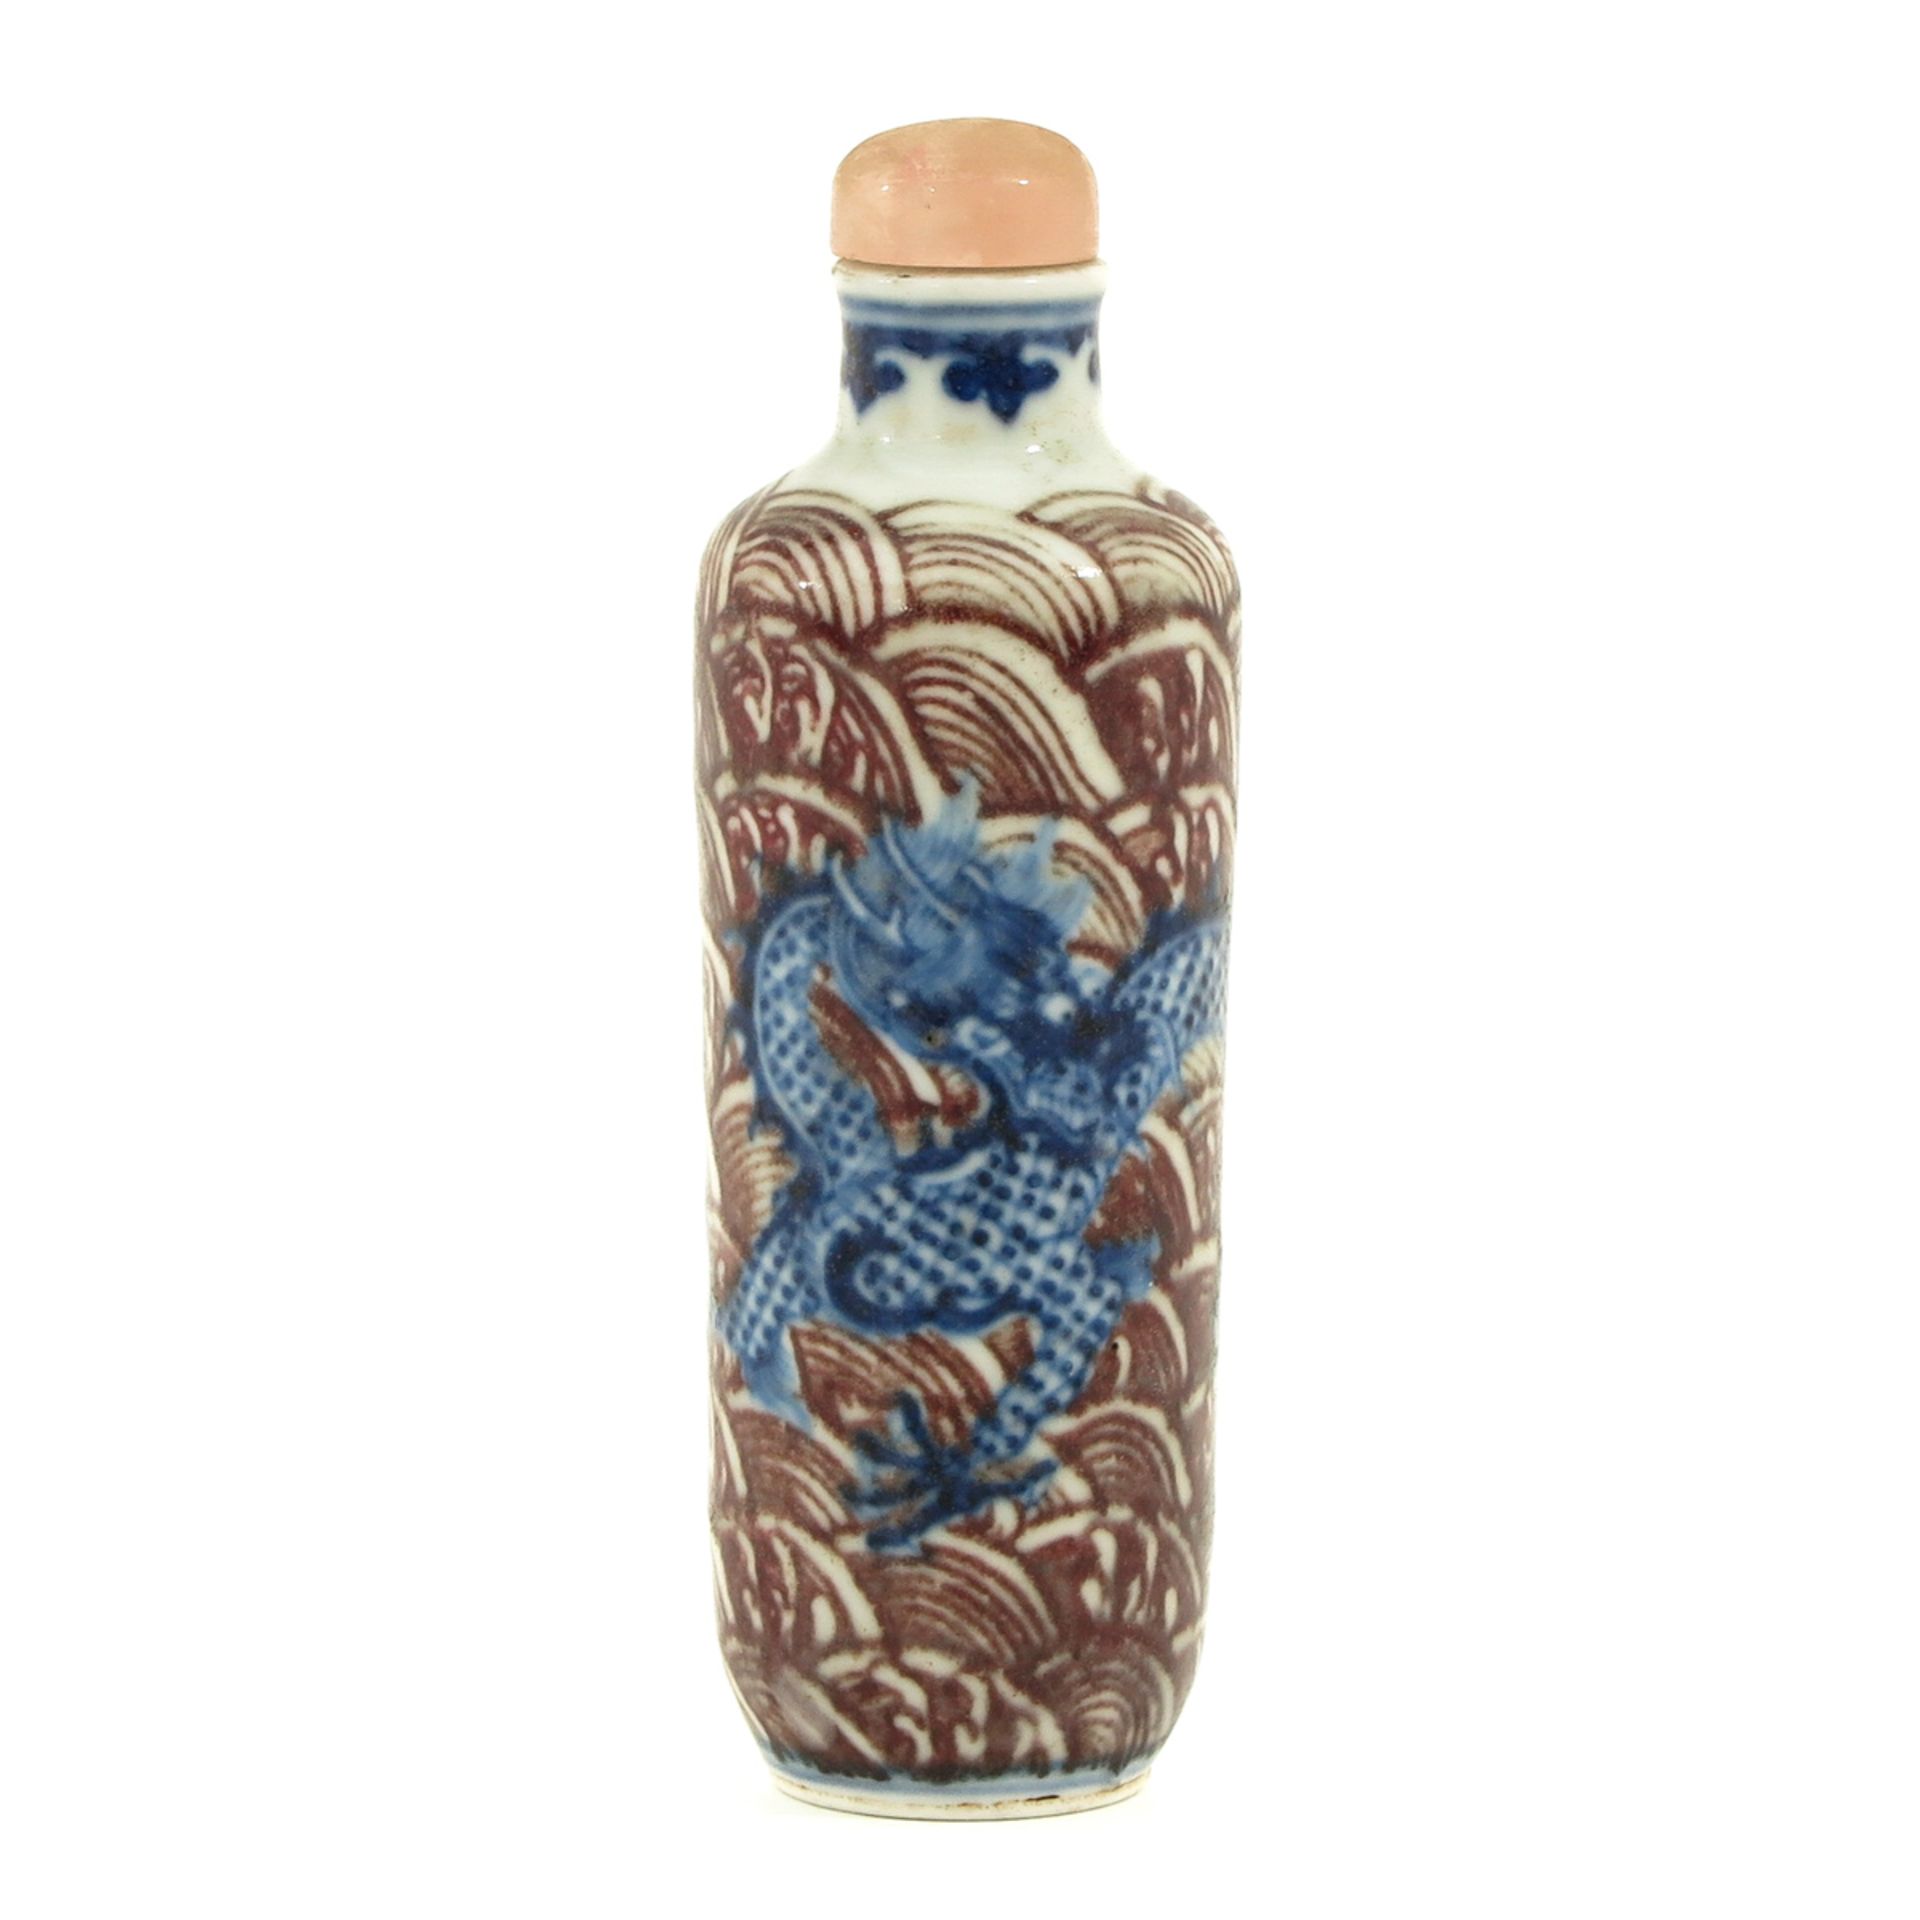 An Iron Red and Blue Snuff Bottle